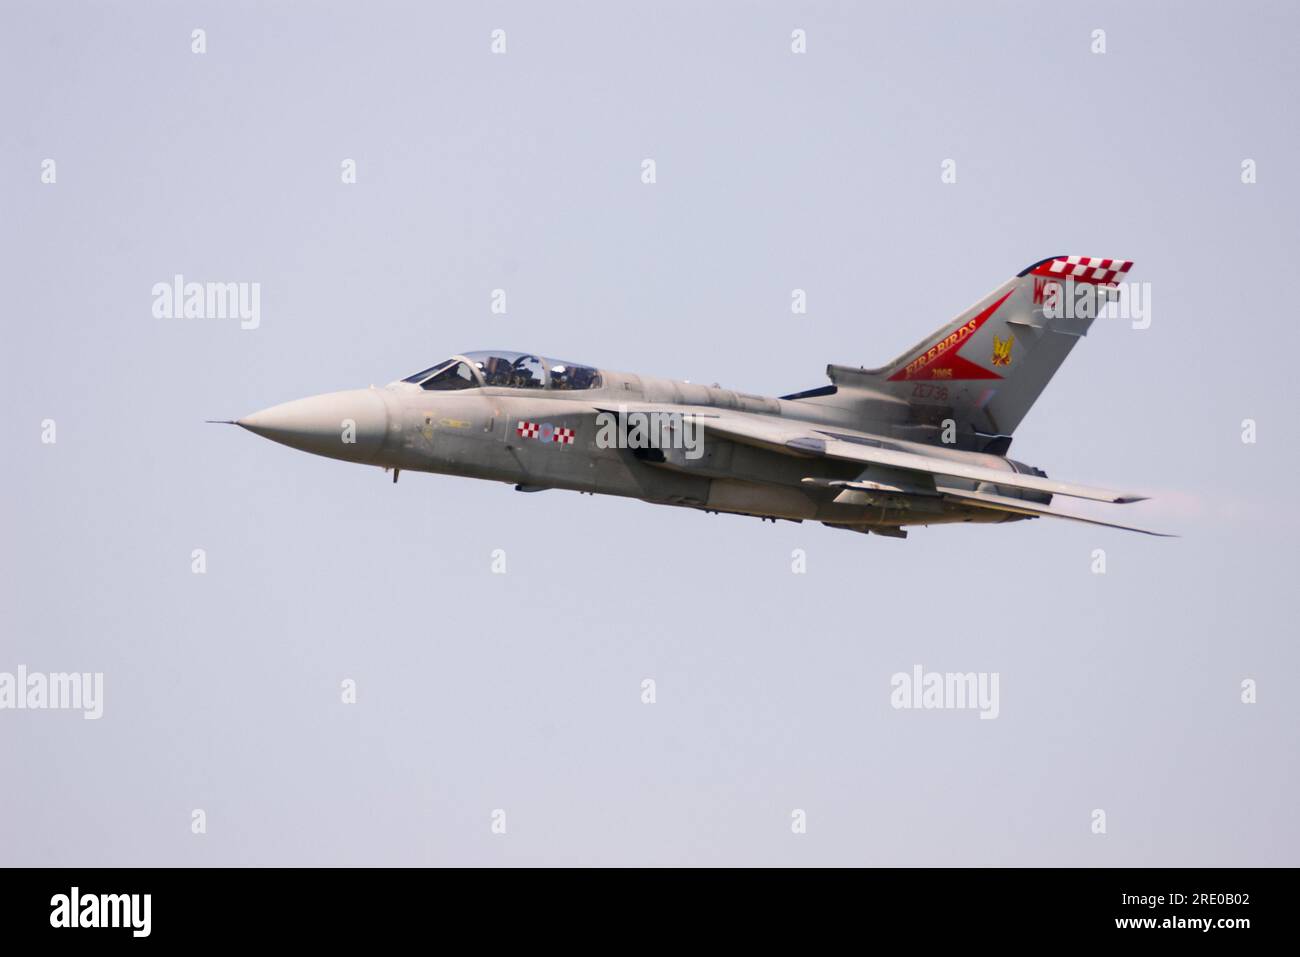 Royal Air Force, RAF, Panavia Tornado F3 fighter jet plane of Firebirds 56 squadron flying at Royal International Air Tattoo airshow. Special display Stock Photo